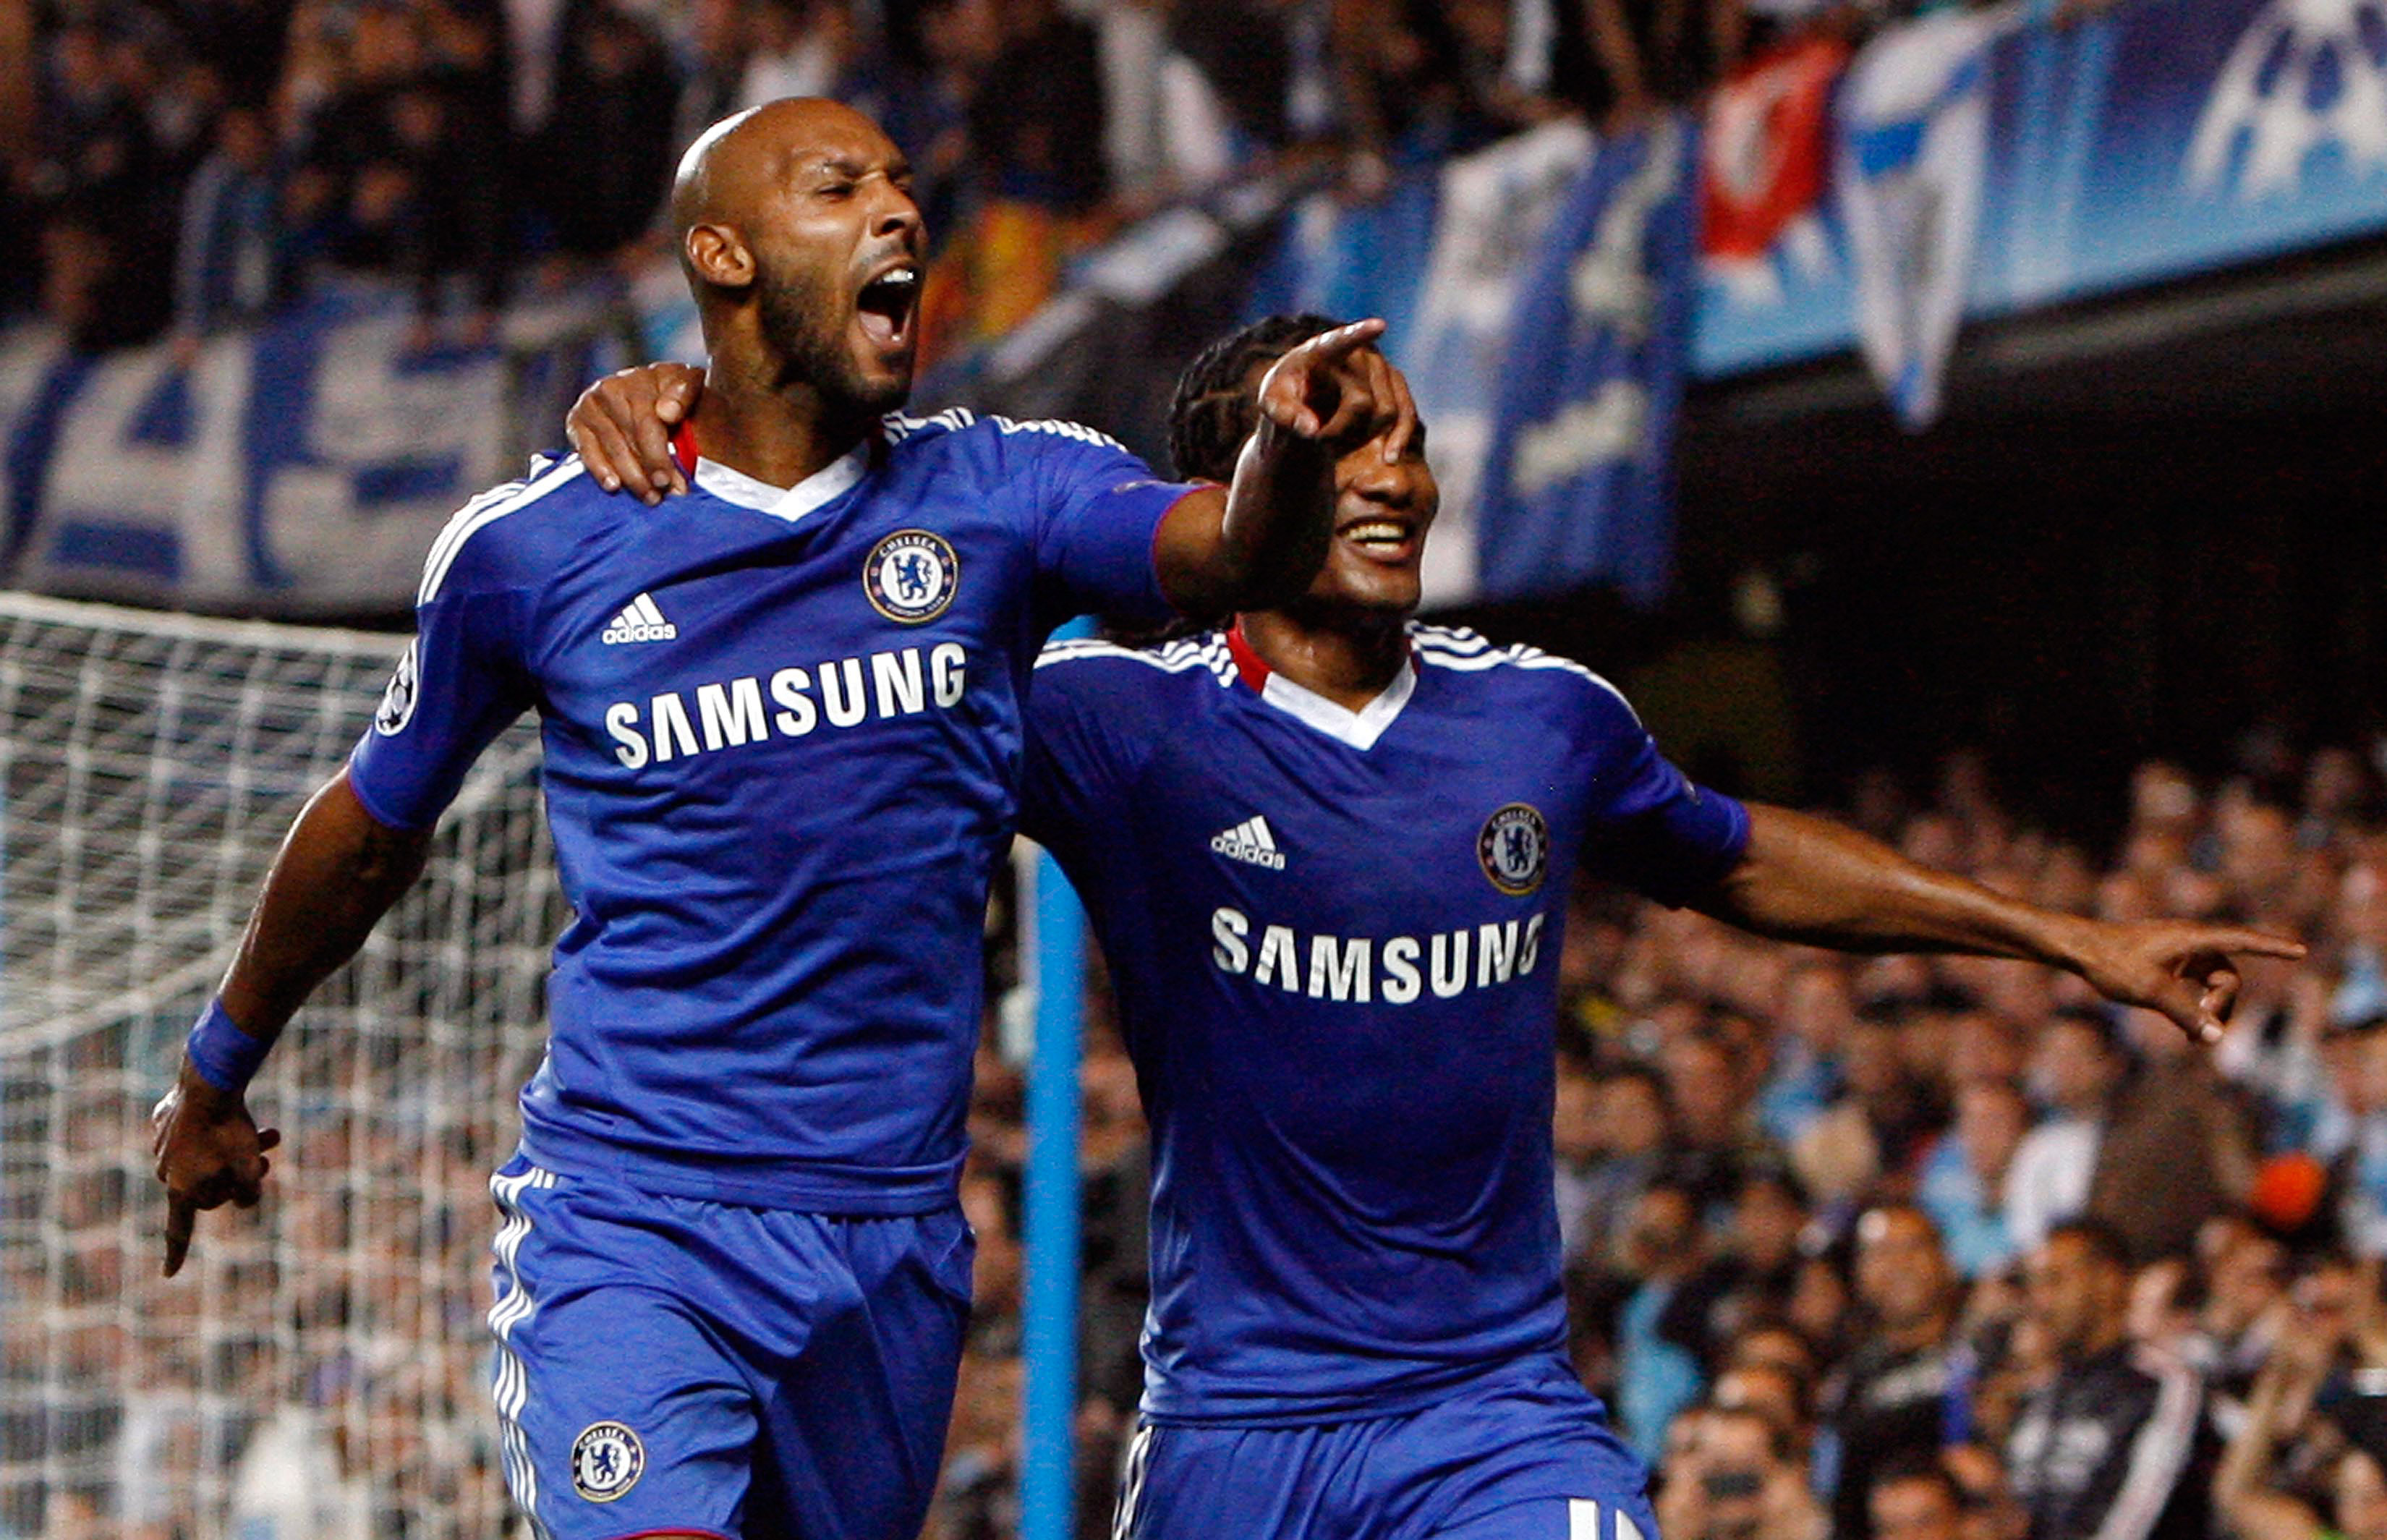 LONDON, ENGLAND - SEPTEMBER 28 :   Nicolas Anelka (L) of Chelsea celebrates his goal from the penalty spot with team-mate Florent Malouda during the UEFA Champions League Group F match between Chelsea and Marseille at Stamford Bridge on September 28, 2010